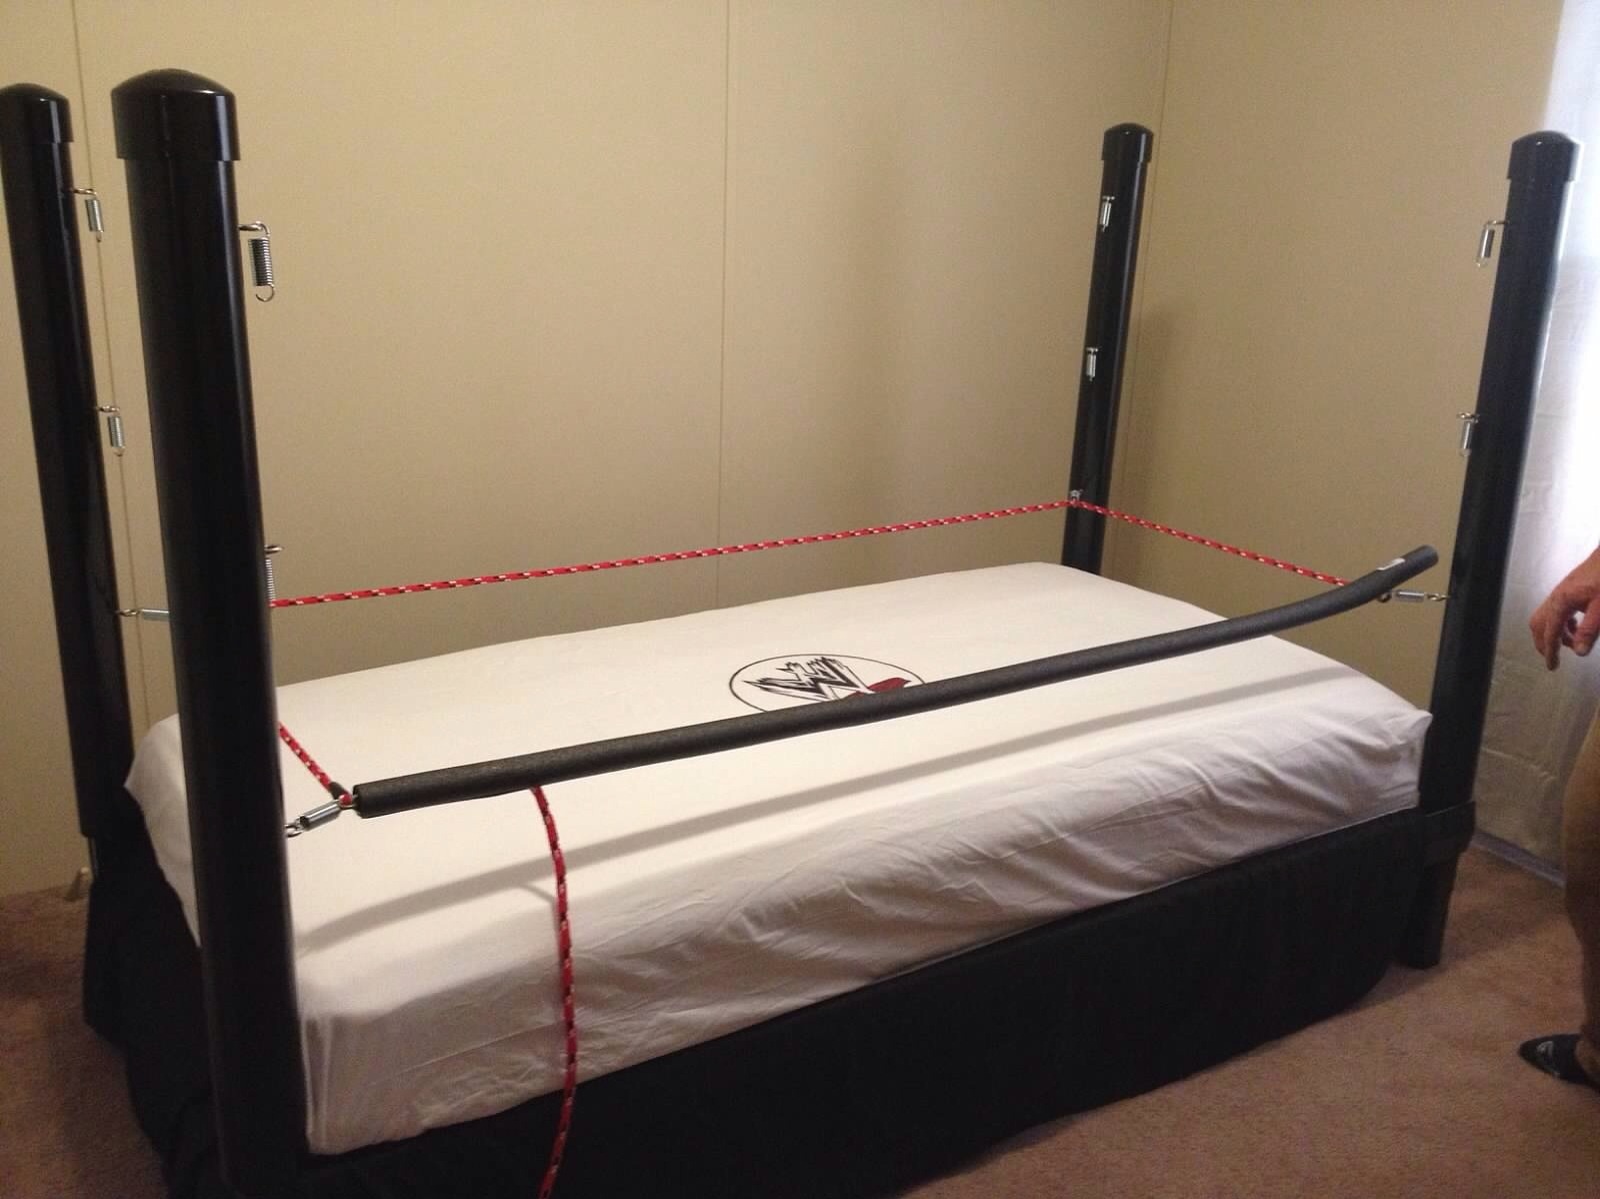 adrian hamilton recommends Wwe Wrestling Ring Beds